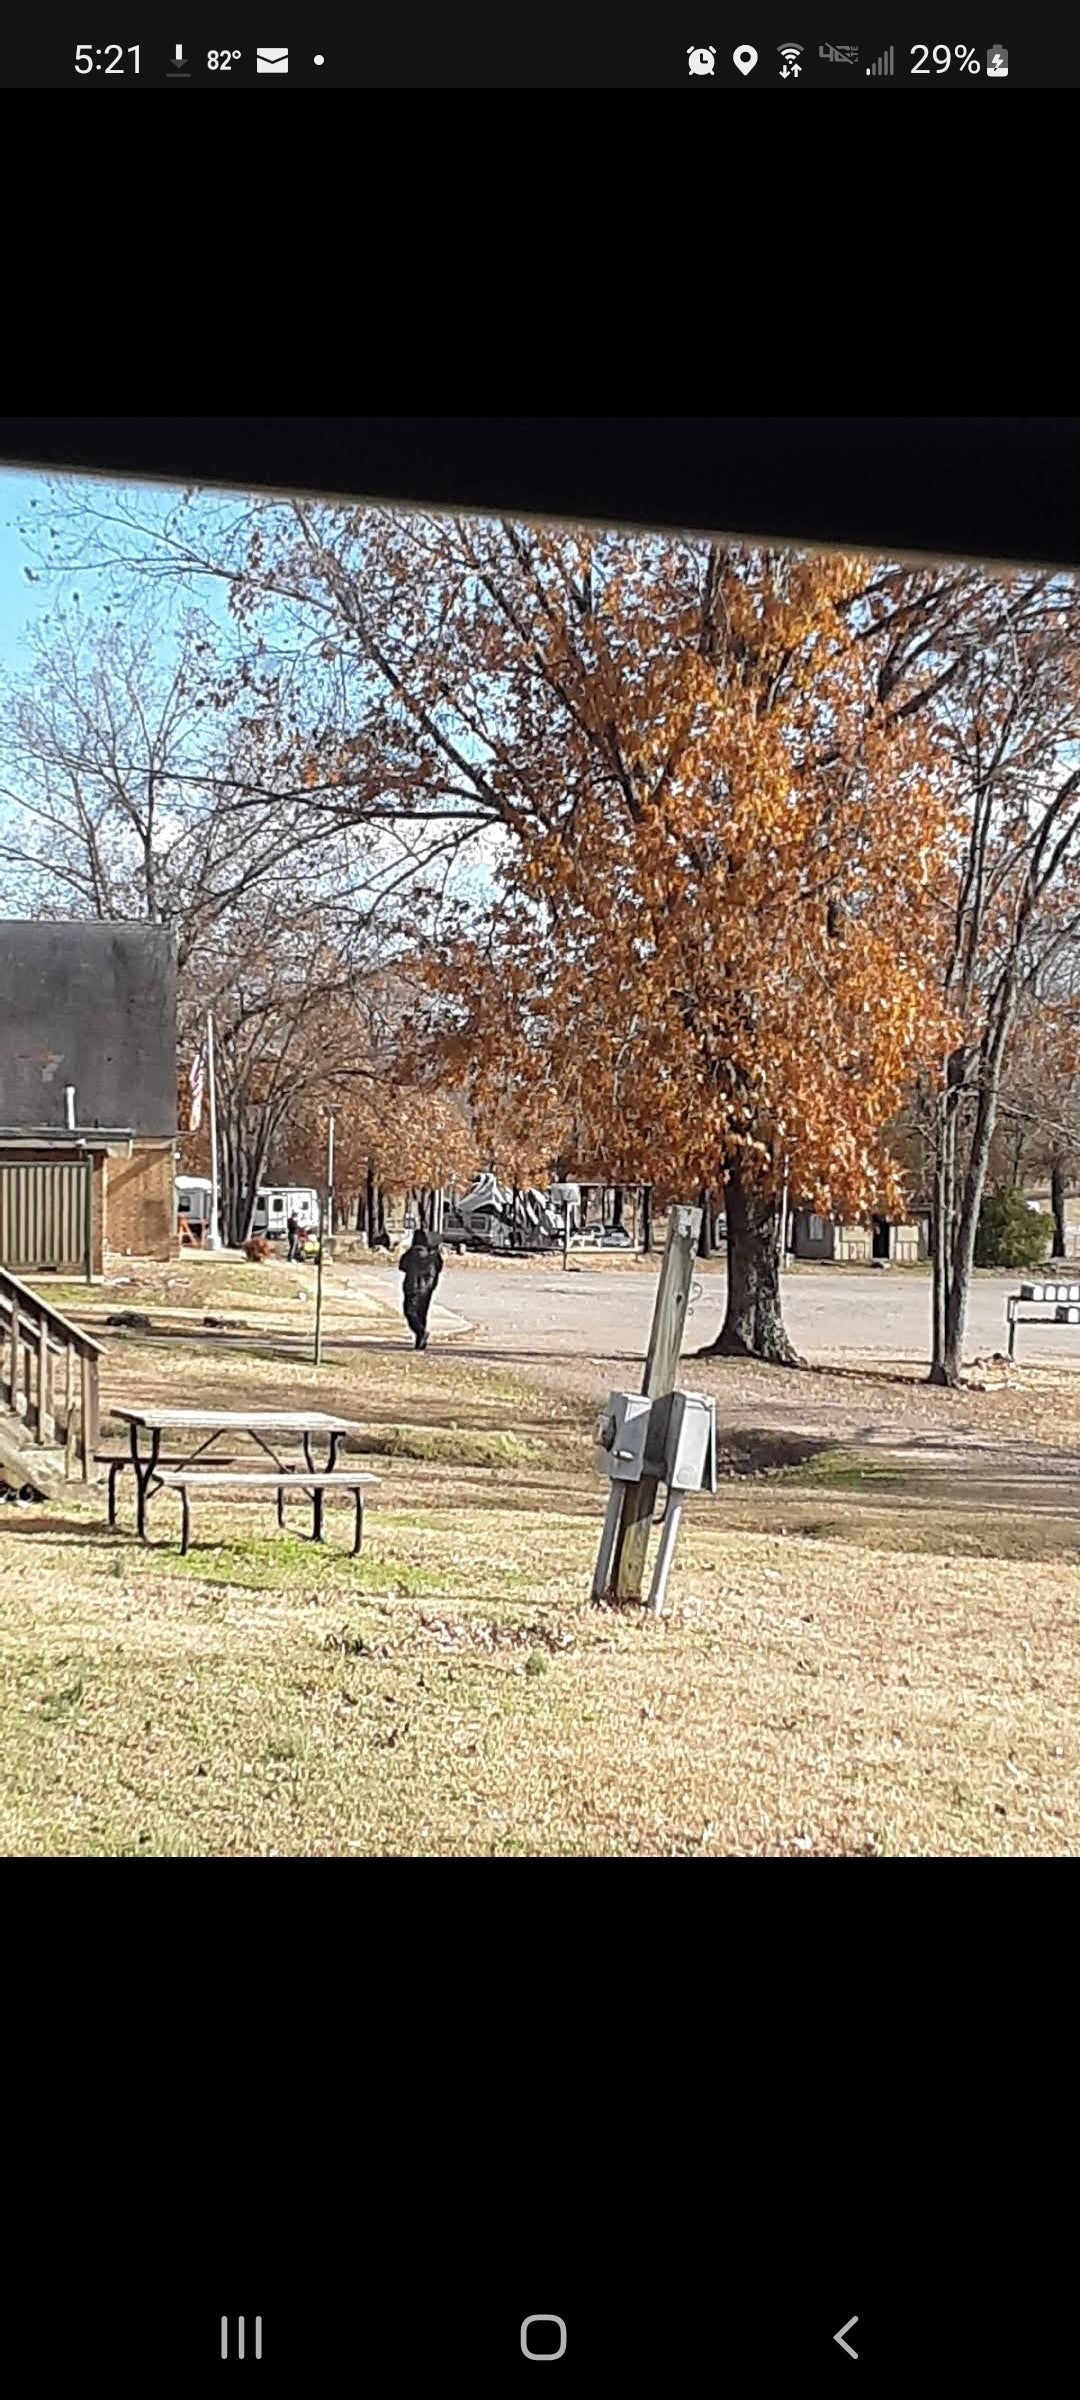 Camper submitted image from Morrilton RV Park - 5